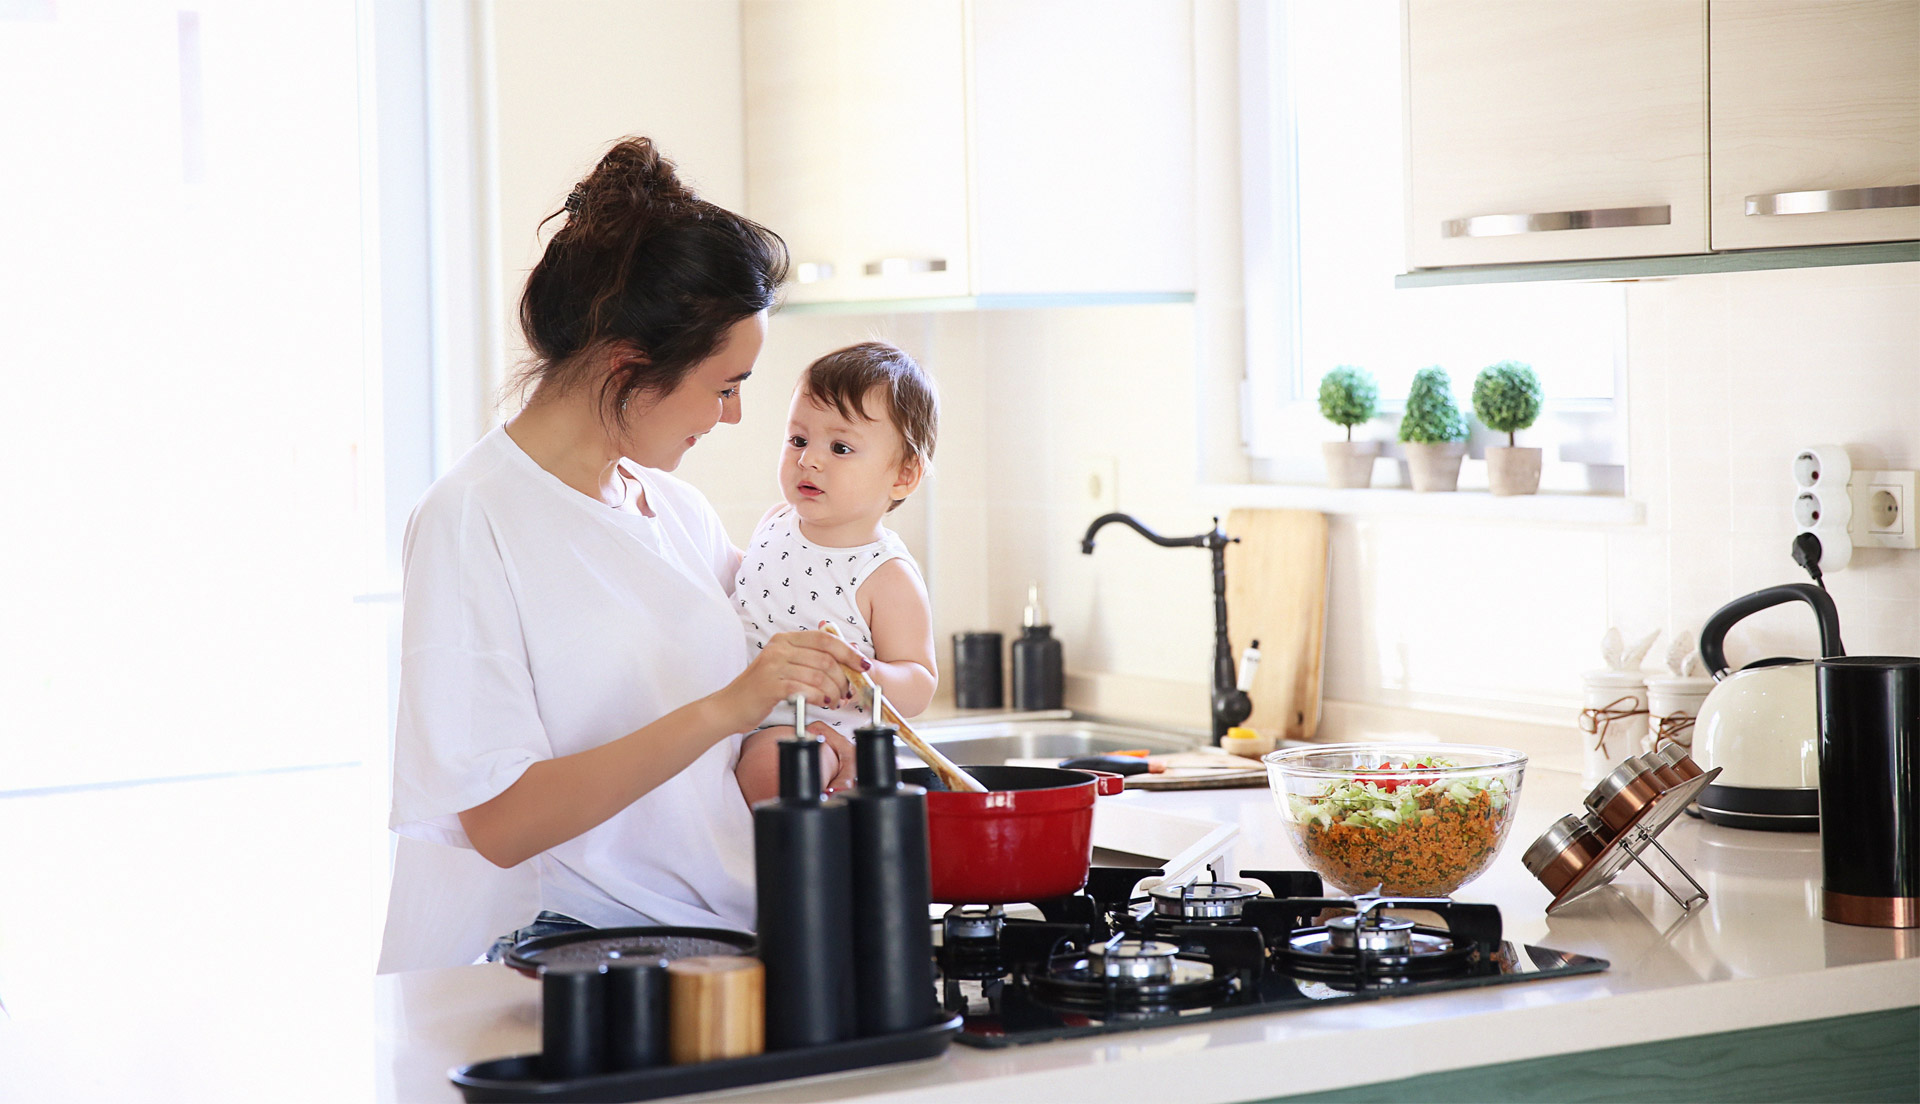 A mother holding a toddler and cooking food